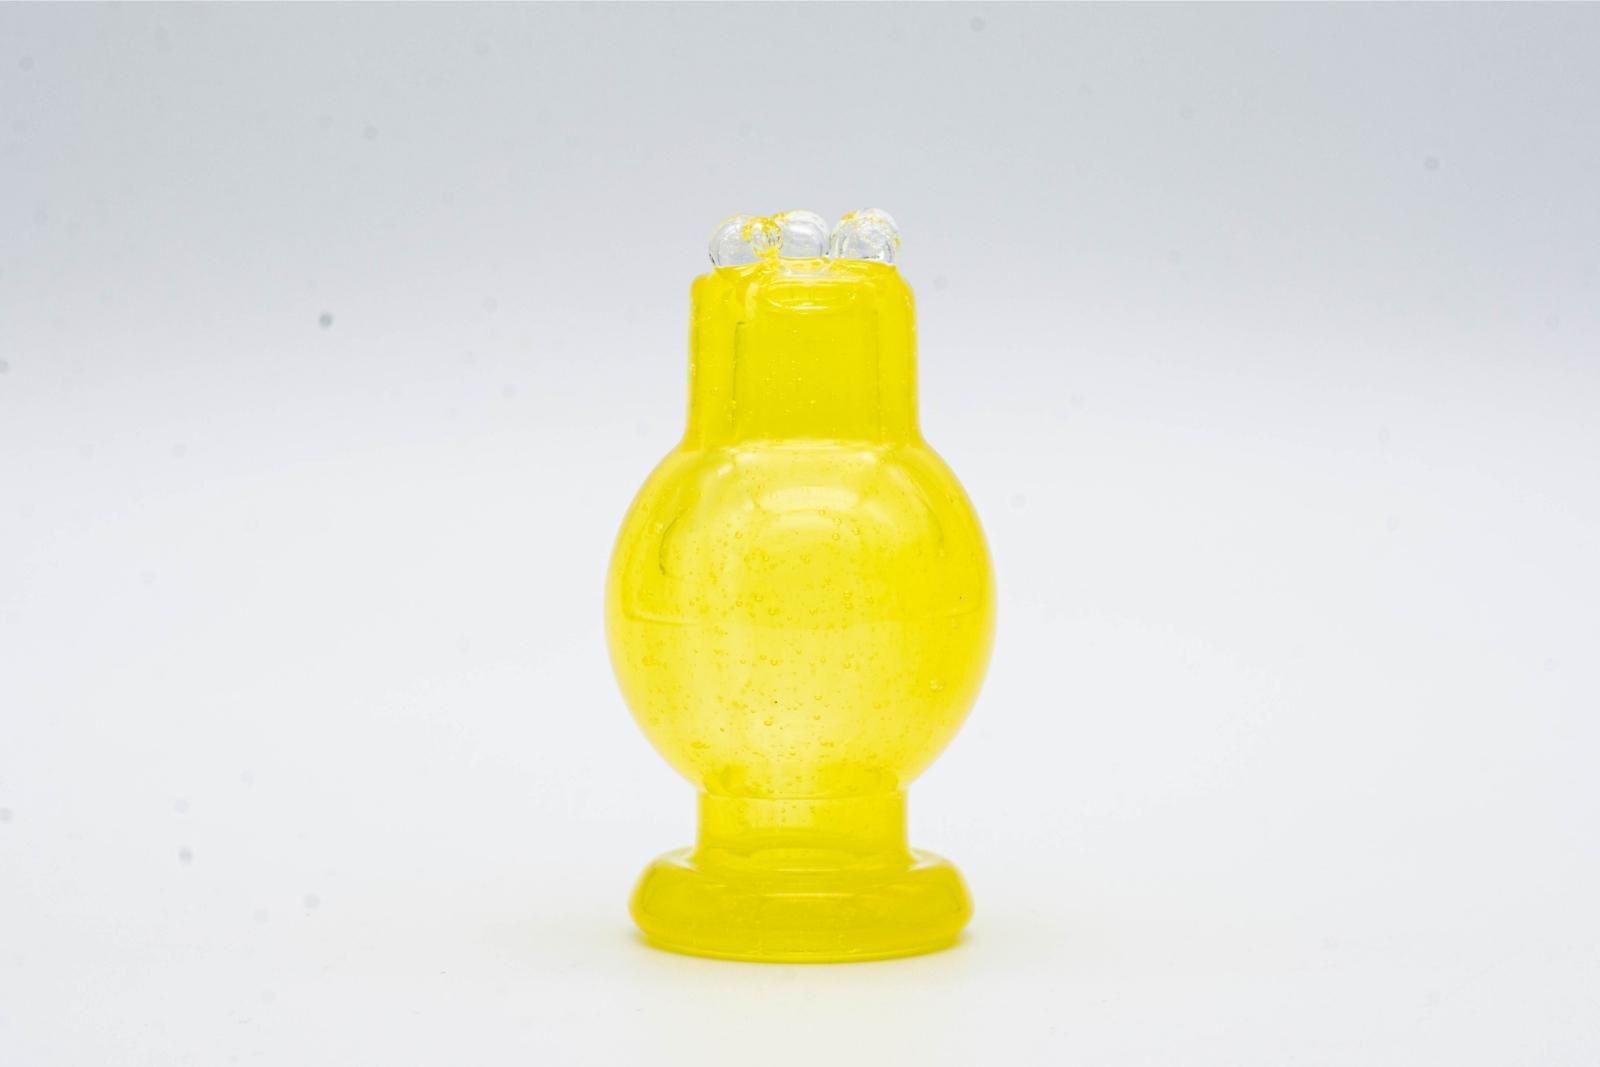 A yellow spinner bubble cap made by BorOregon, on a white background